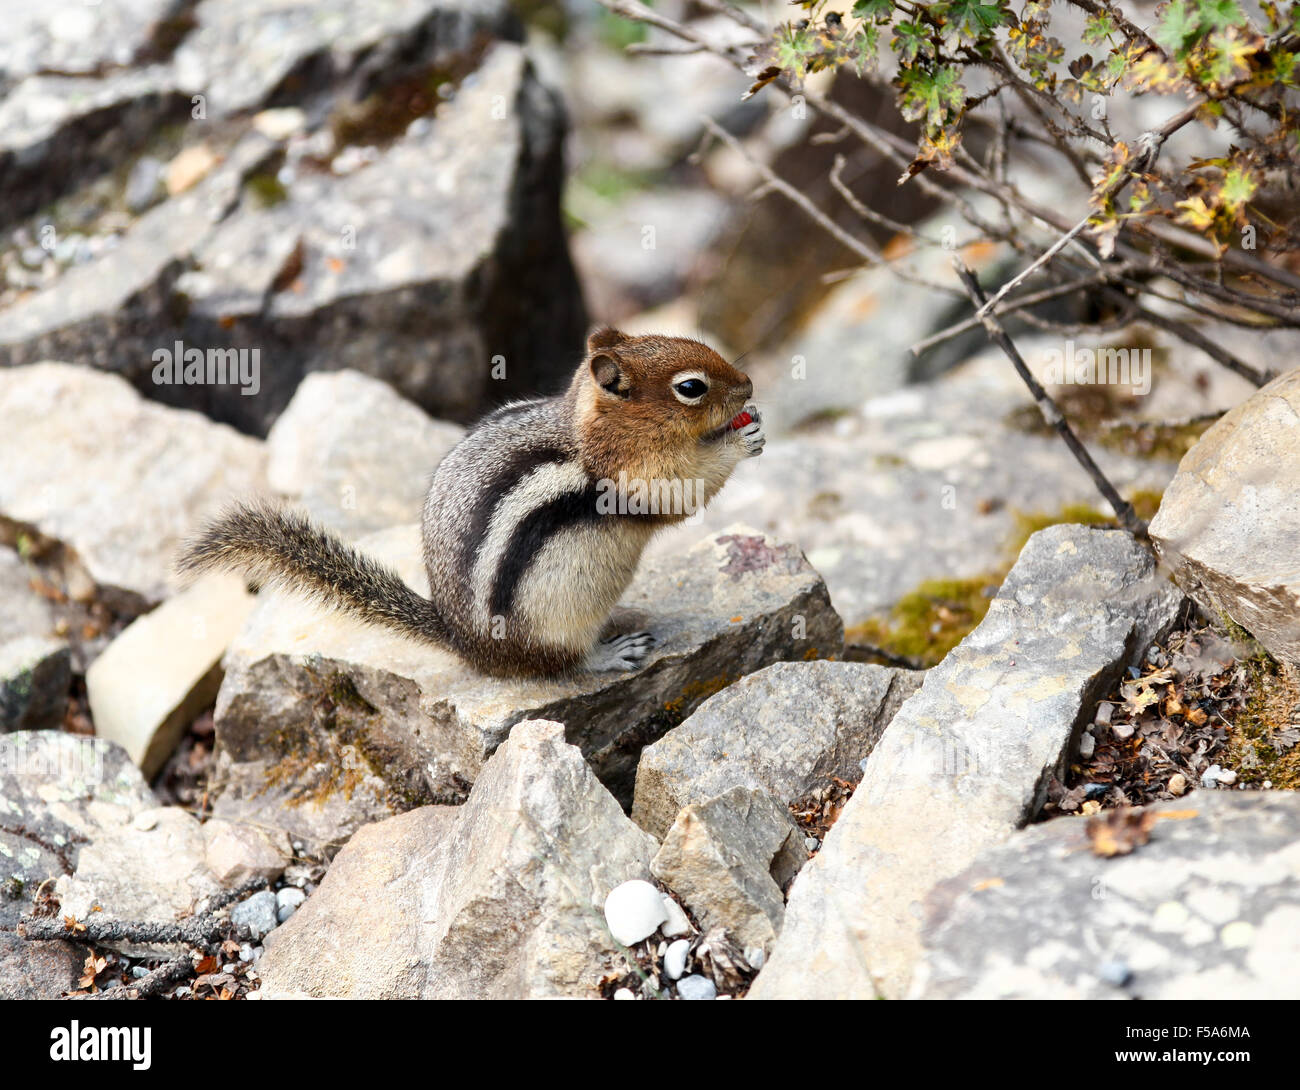 A Chipmunk or Golden-mantled ground squirrel (Callospermophilus lateralis) at Moraine Lake Banff National Park Alberta Canada Stock Photo